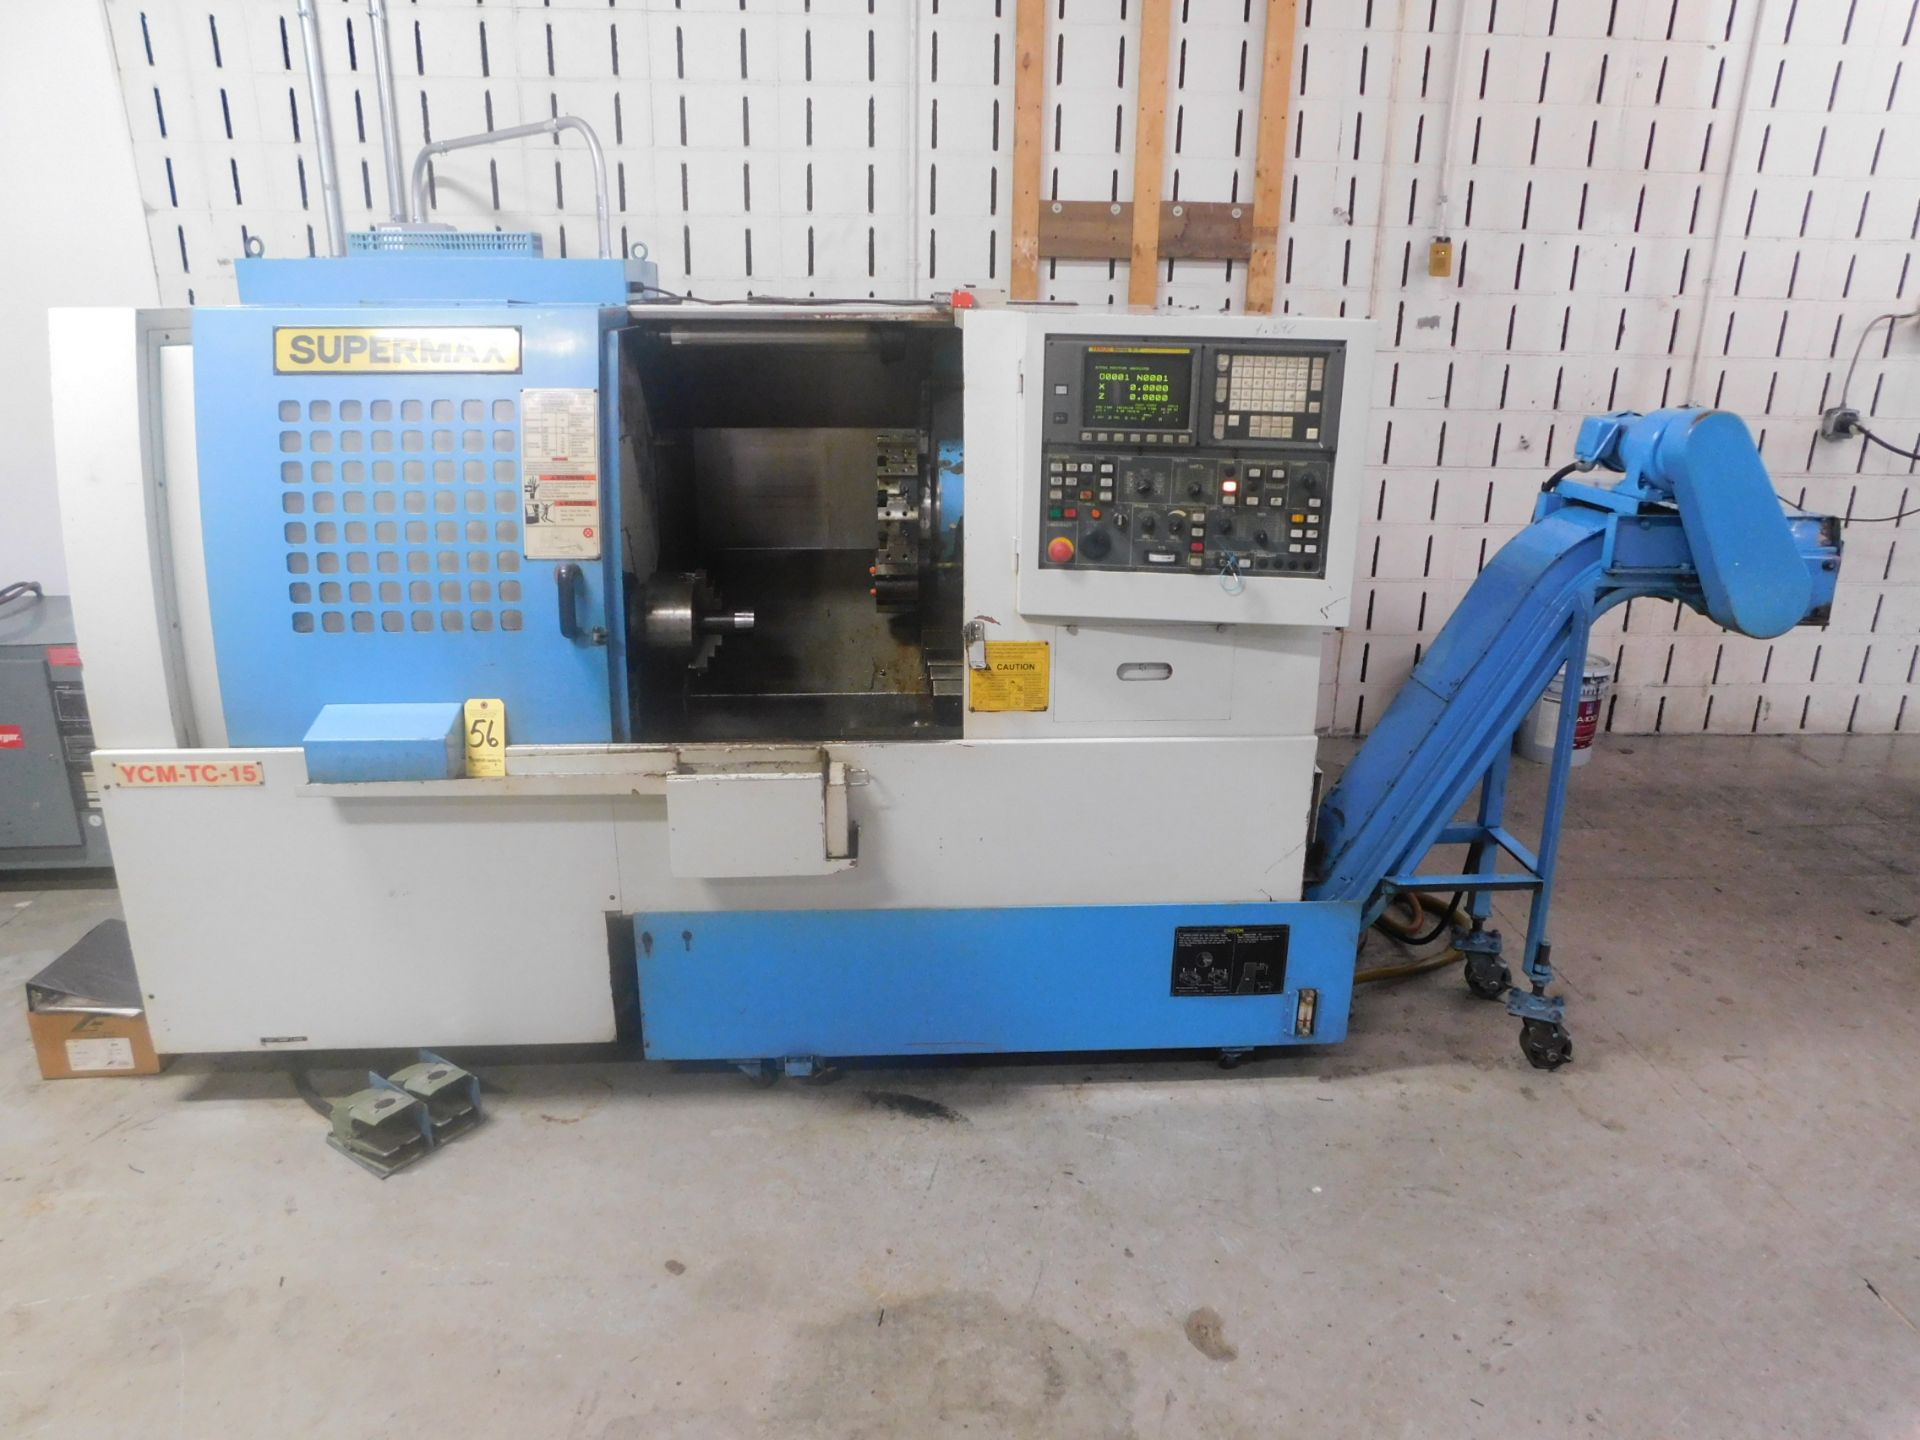 Supermax Model YCM-TC-15 CNC Turning Center, SN 025028, with Fanuc Series O-T CNC Control, 8" 3-